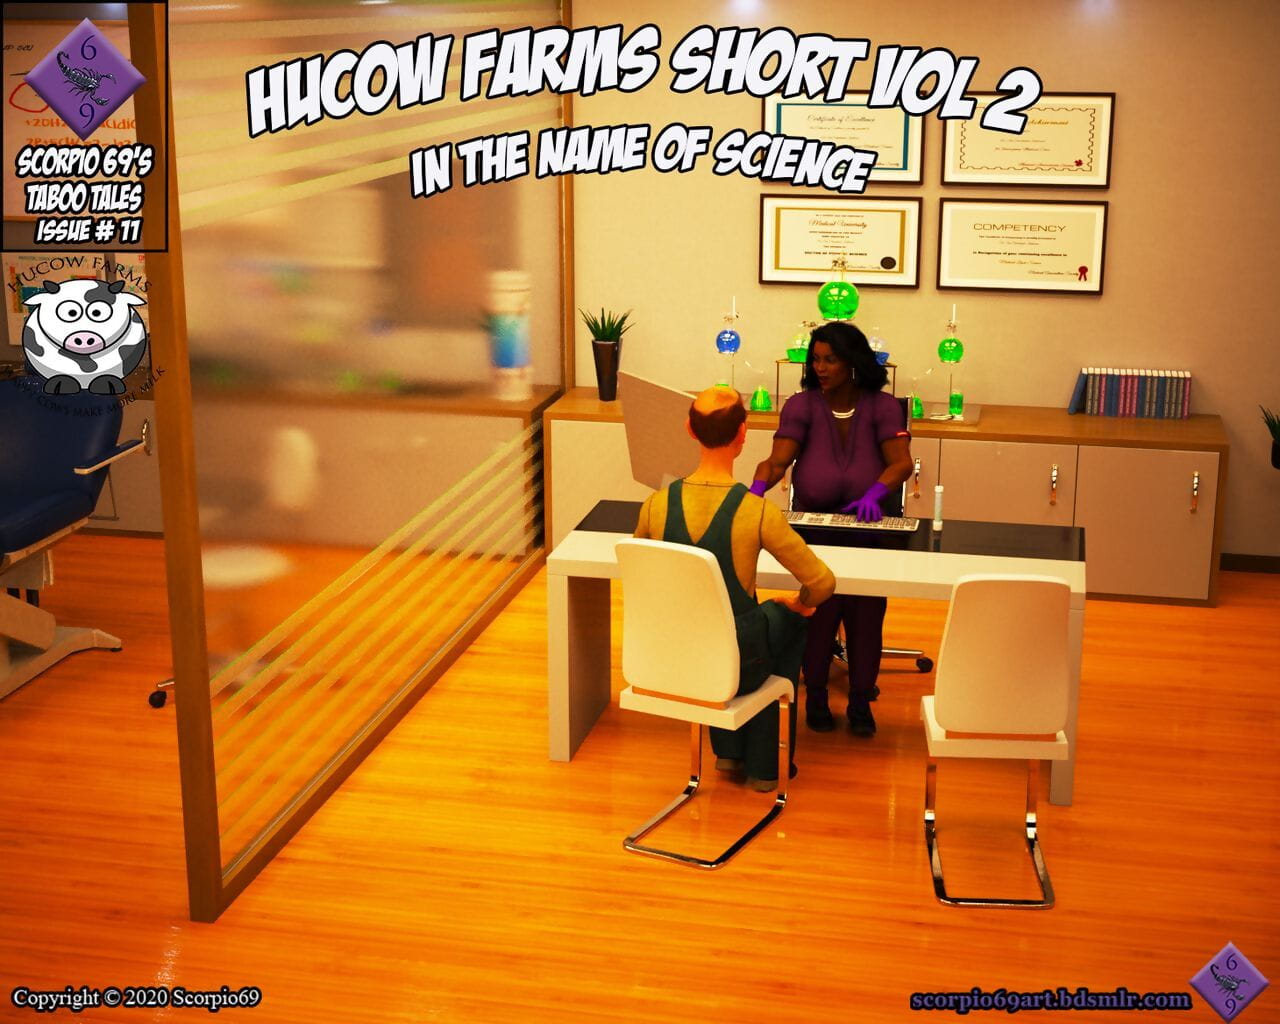 Scorpio69- Hucow Farms Shorts Vol 2- In The Name Of Science page 1